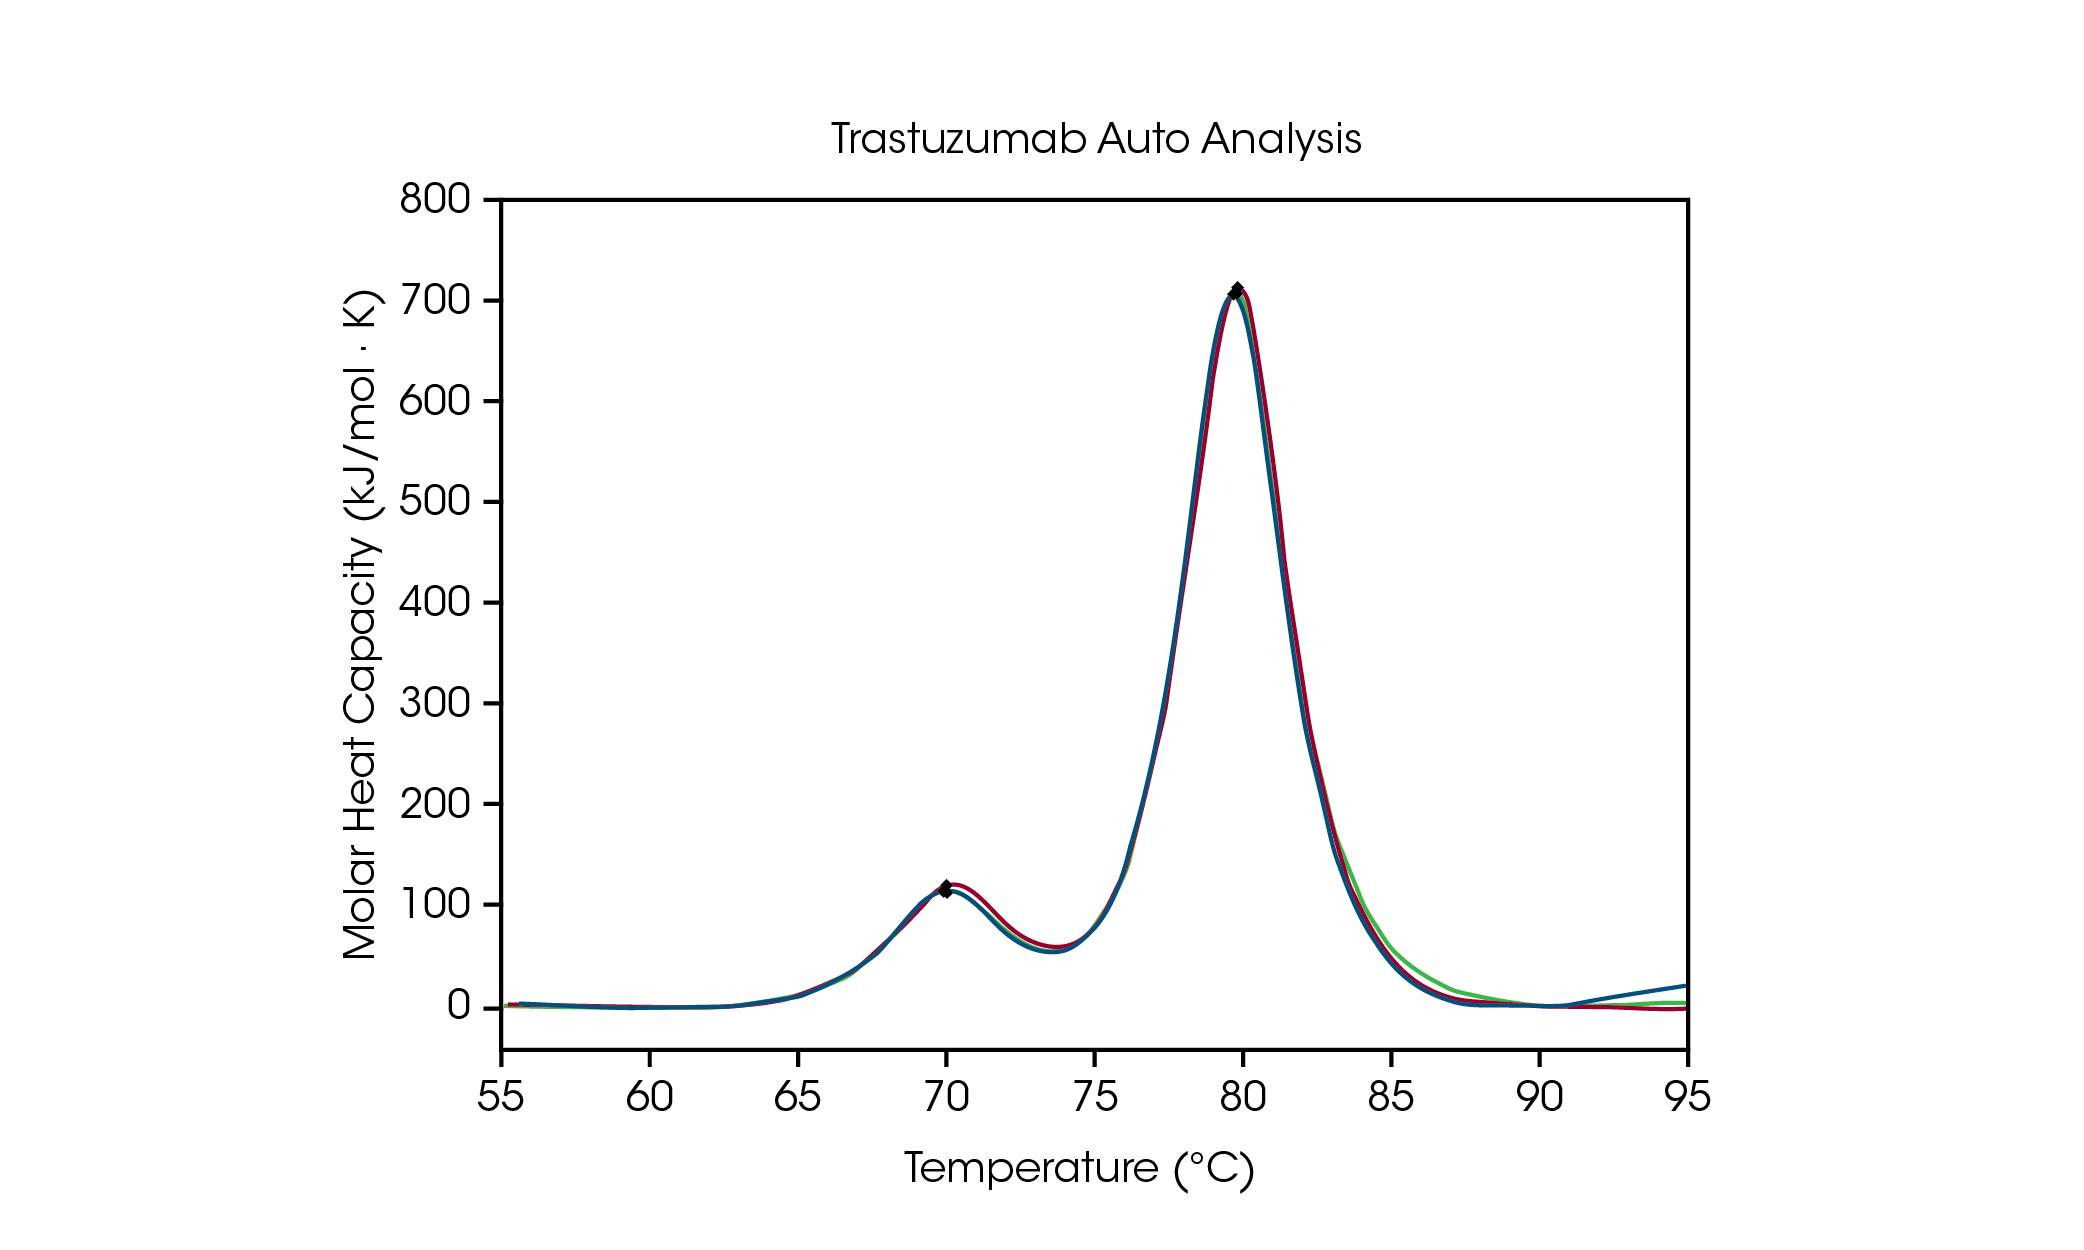 Figure 3. Overlay graph of triplicate scans generated with RapidDSC using automated Tmax and baseline detection of antibody thermograms in triplicate at 50 mg/mL. Detected Tmax values indicated with a black dot.